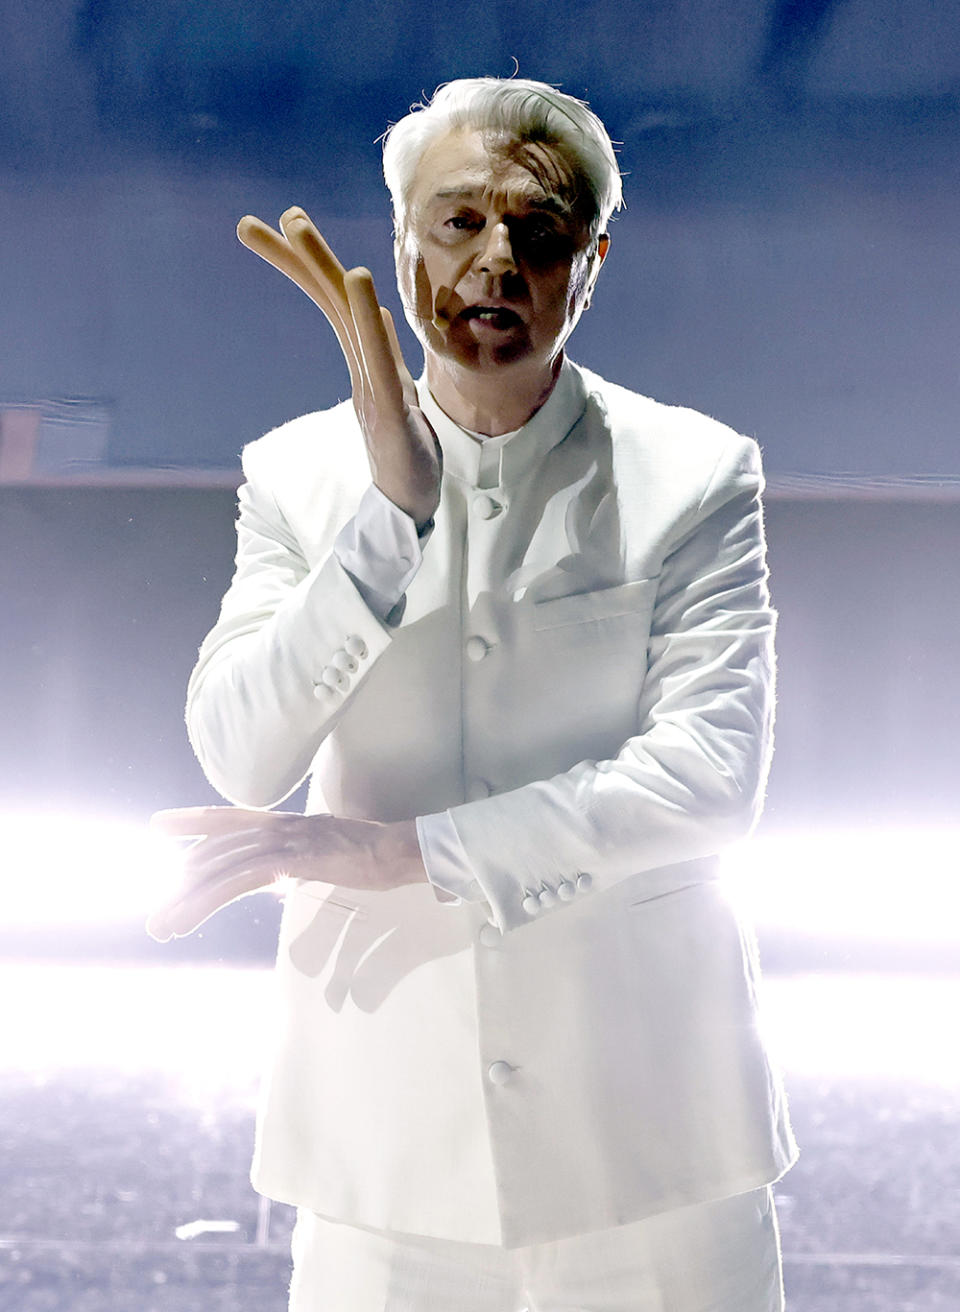 HOLLYWOOD, CALIFORNIA - MARCH 12: David Byrne performs onstage during the 95th Annual Academy Awards at Dolby Theatre on March 12, 2023 in Hollywood, California. (Photo by Kevin Winter/Getty Images)